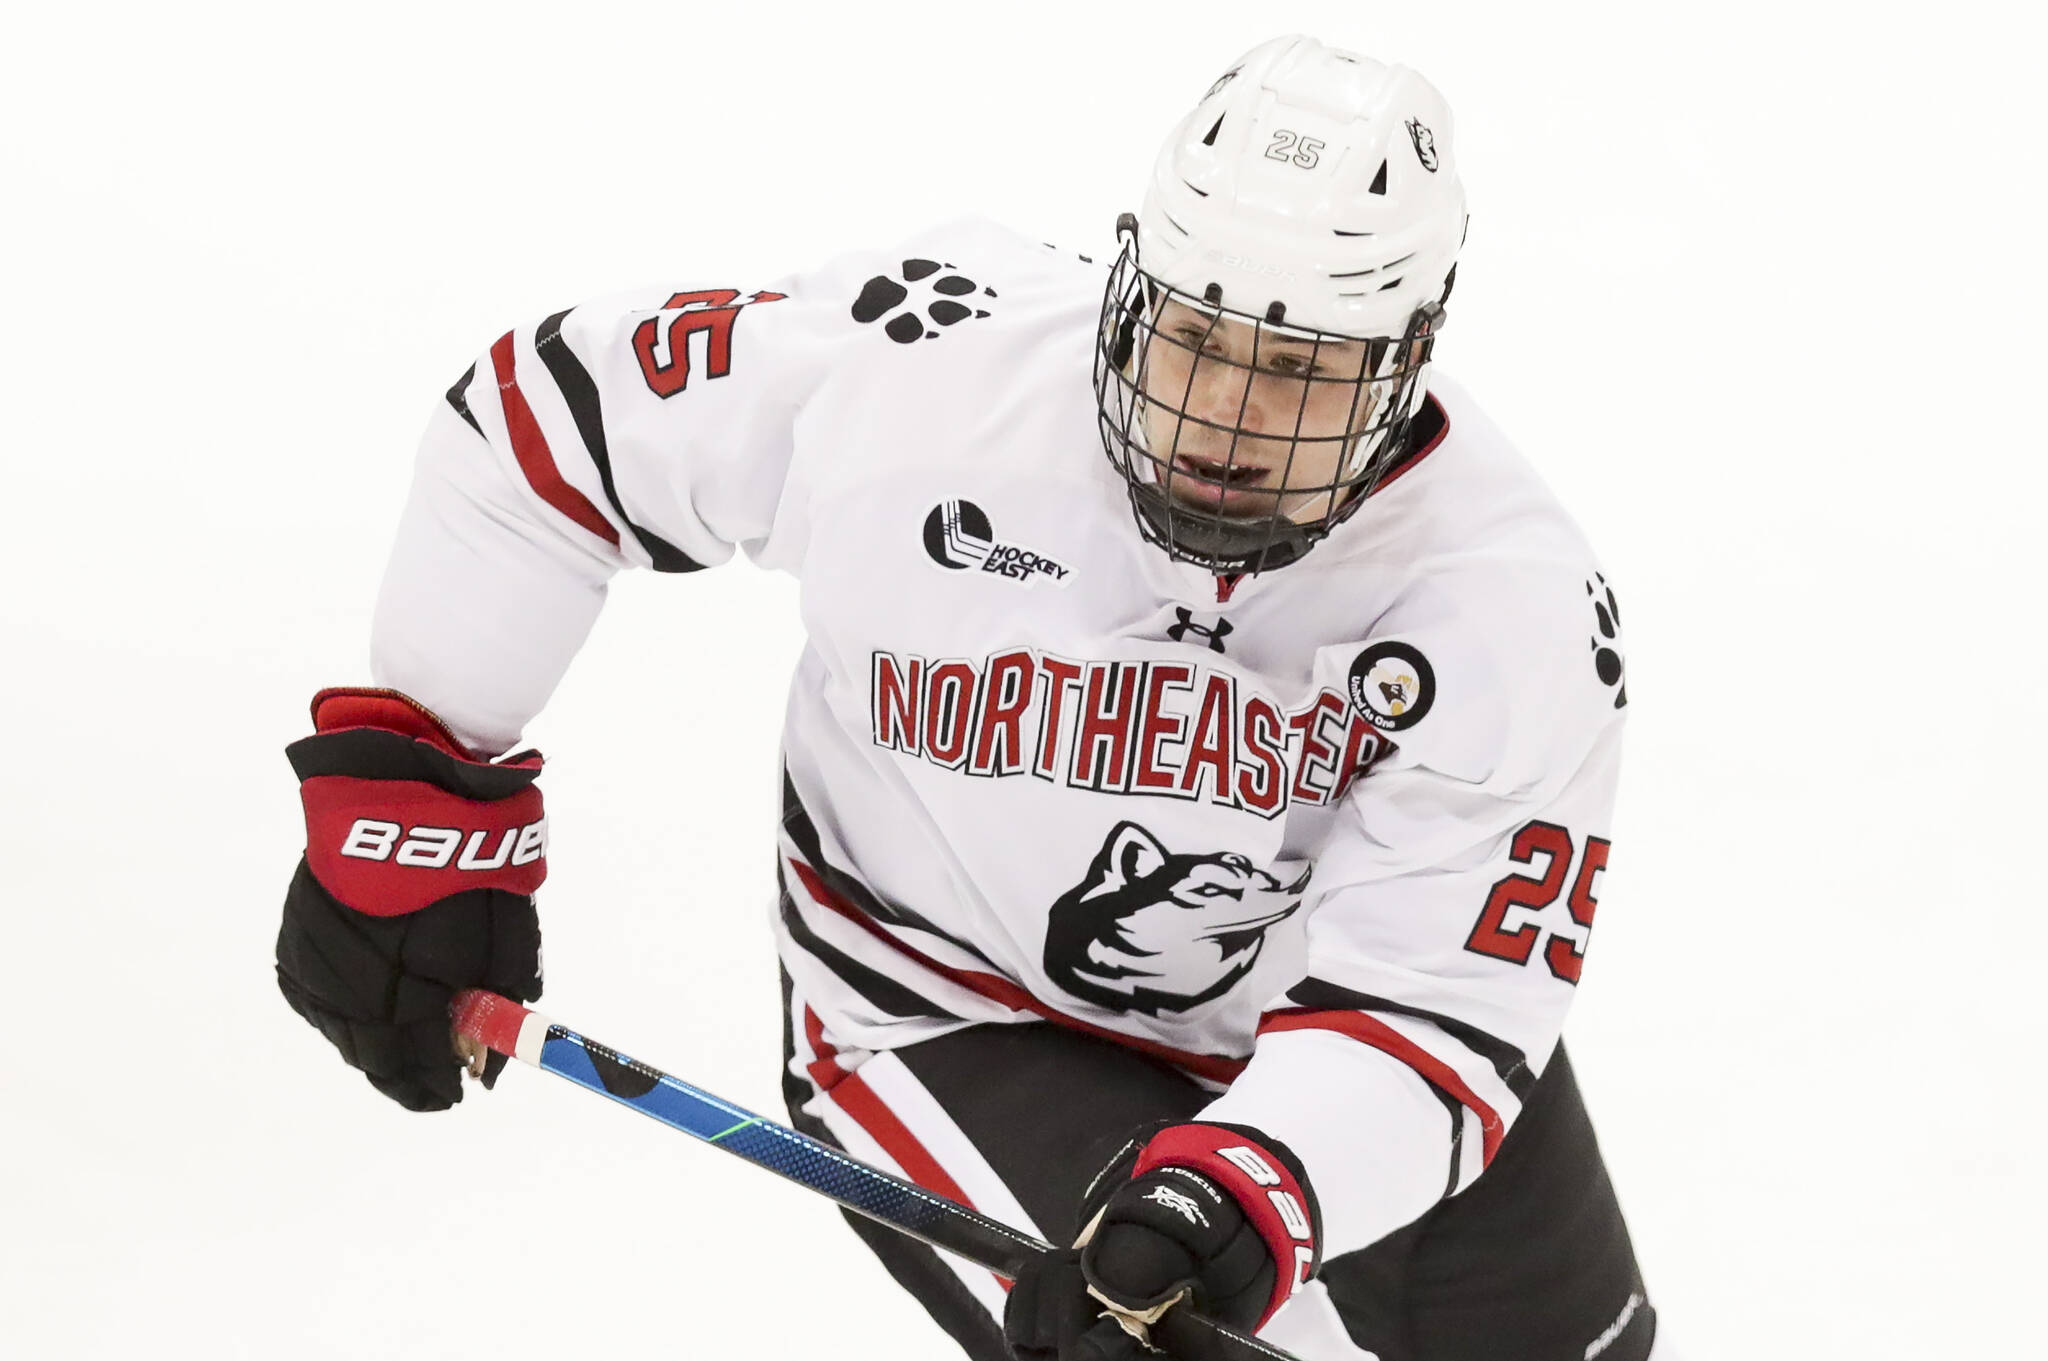 Northeastern Huskies forward Aidan McDonough (25) during an NCAA hockey game against the Merrimack Warriors on Saturday, Dec. 12, 2020, in Boston, Massachusetts. The Vancouver Canucks have signed McDonough to a two-year entry-level contract. THE CANADIAN PRESS/AP/Adam Glanzman